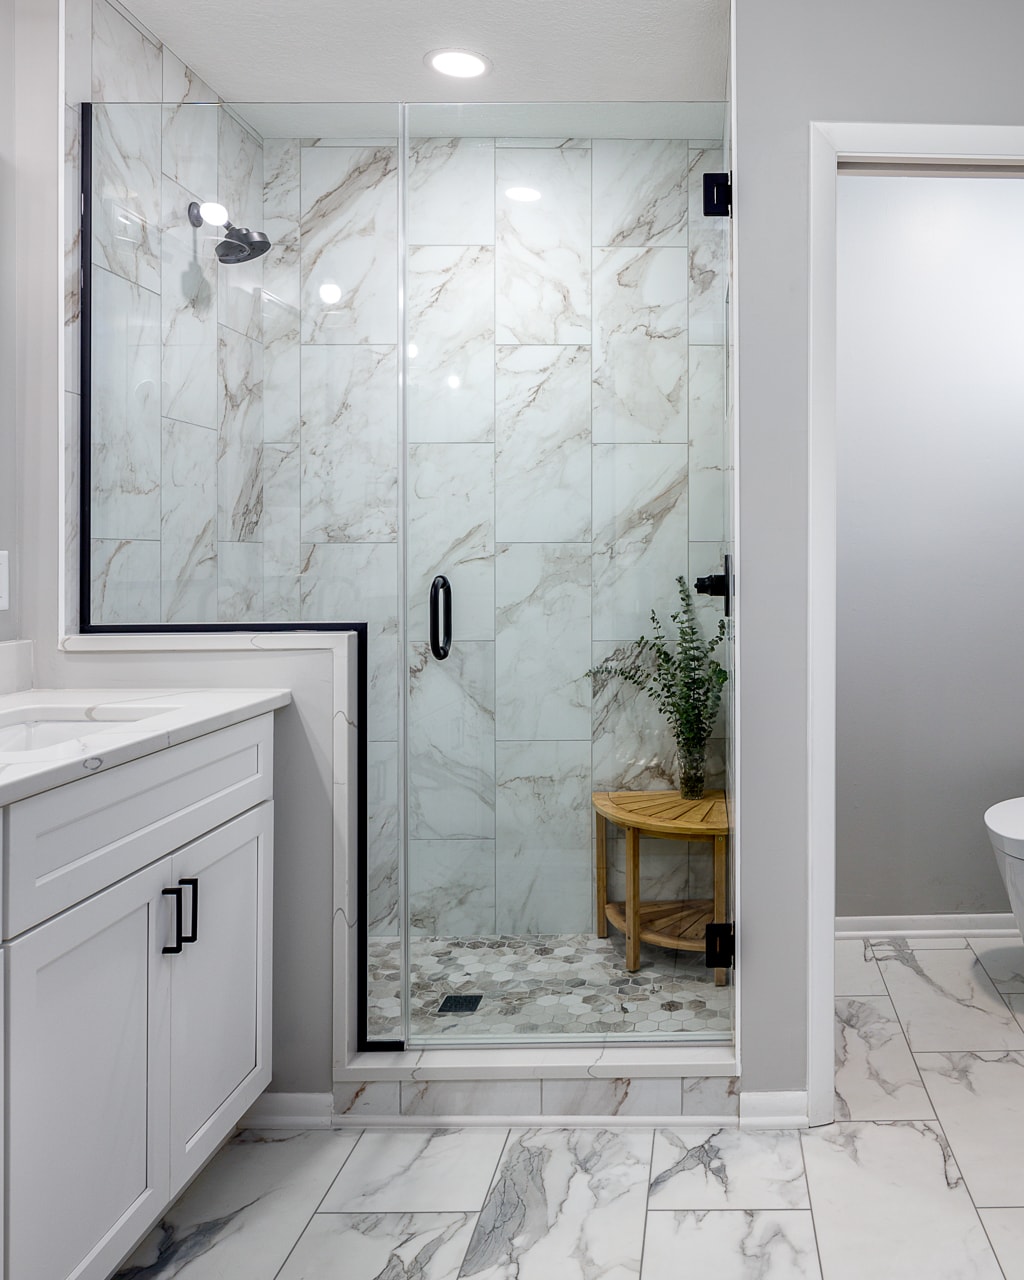 A bathroom renovation with marble floors and a walk-in shower.